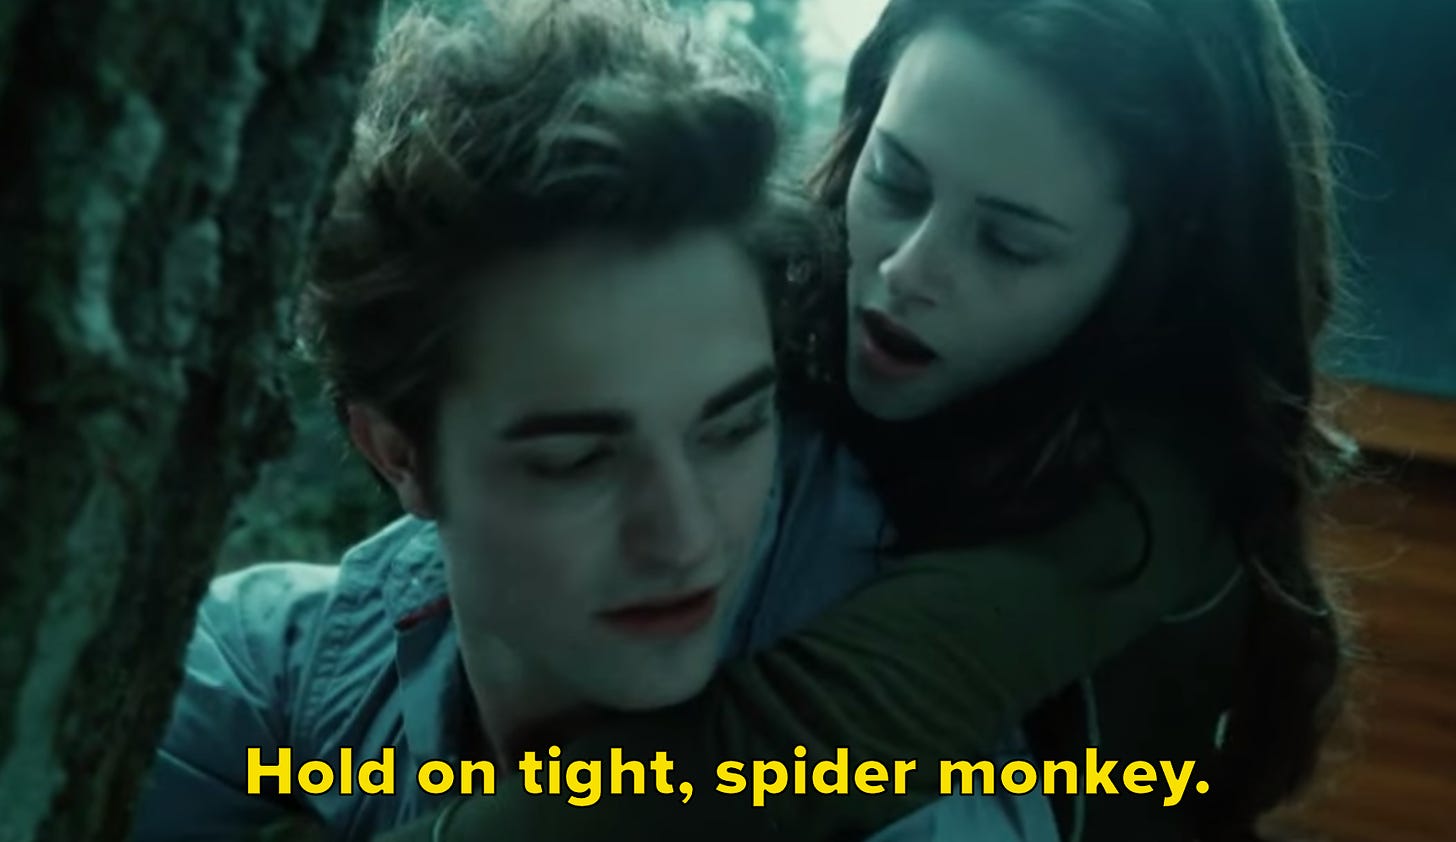 9 Terrifying Scenes From "The Twilight Saga" And 8 Hilarious Ones